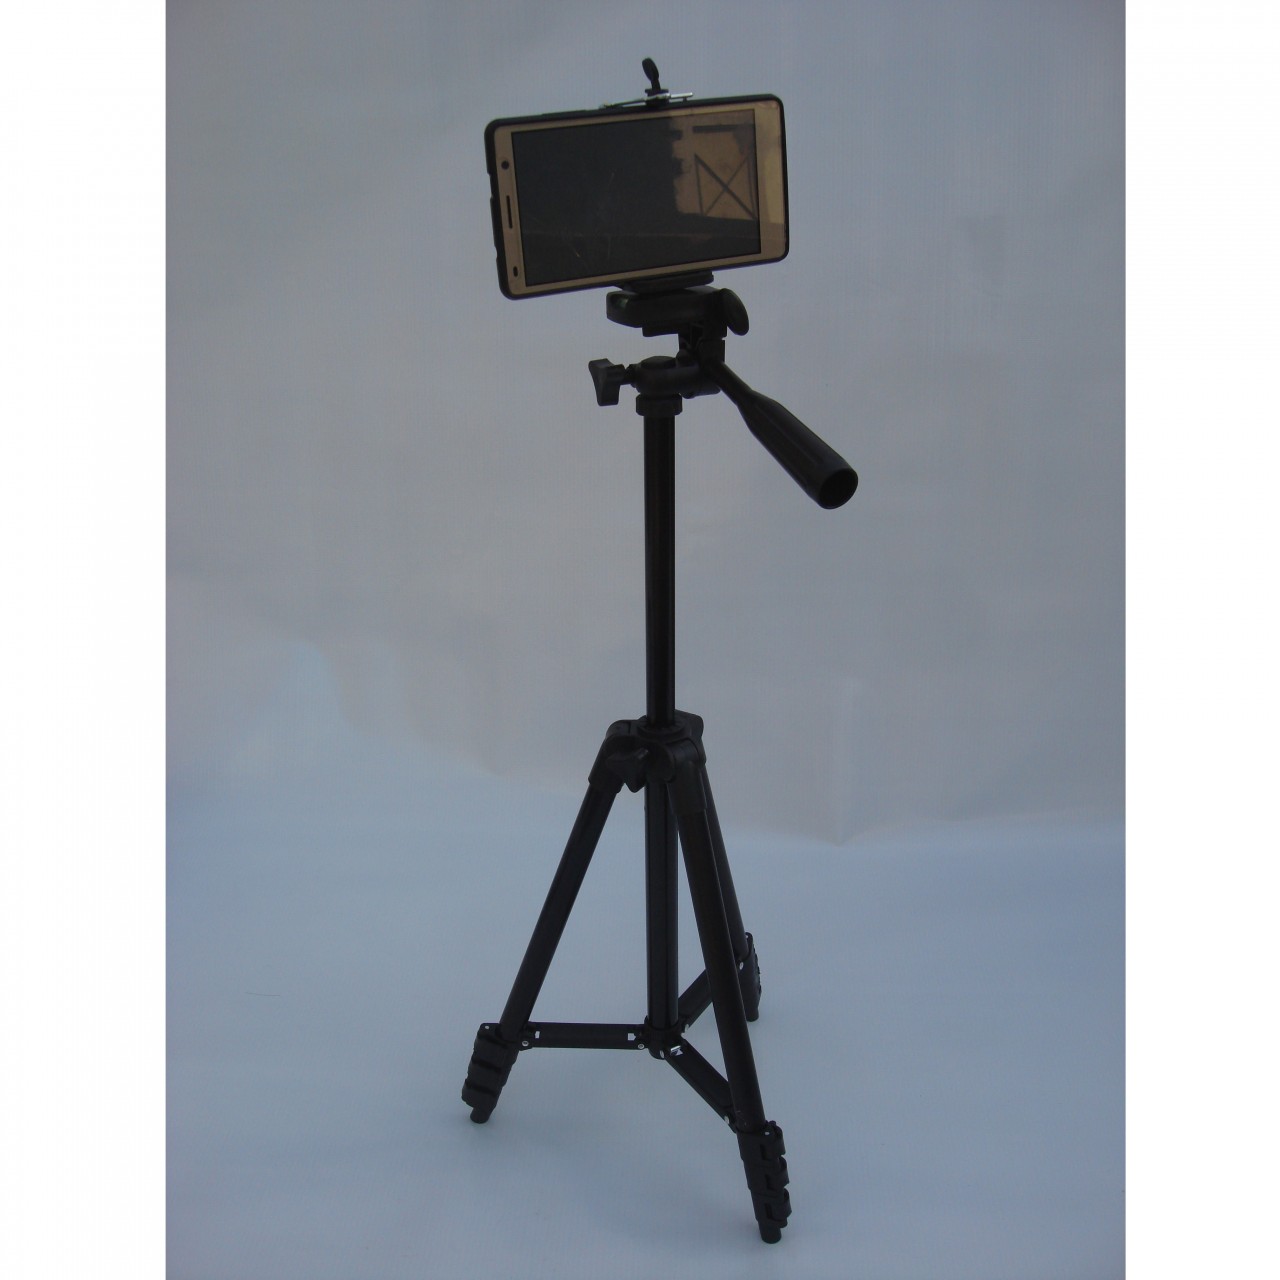 3120 Tripod stand for mobile and camera both (Original pictures shown)